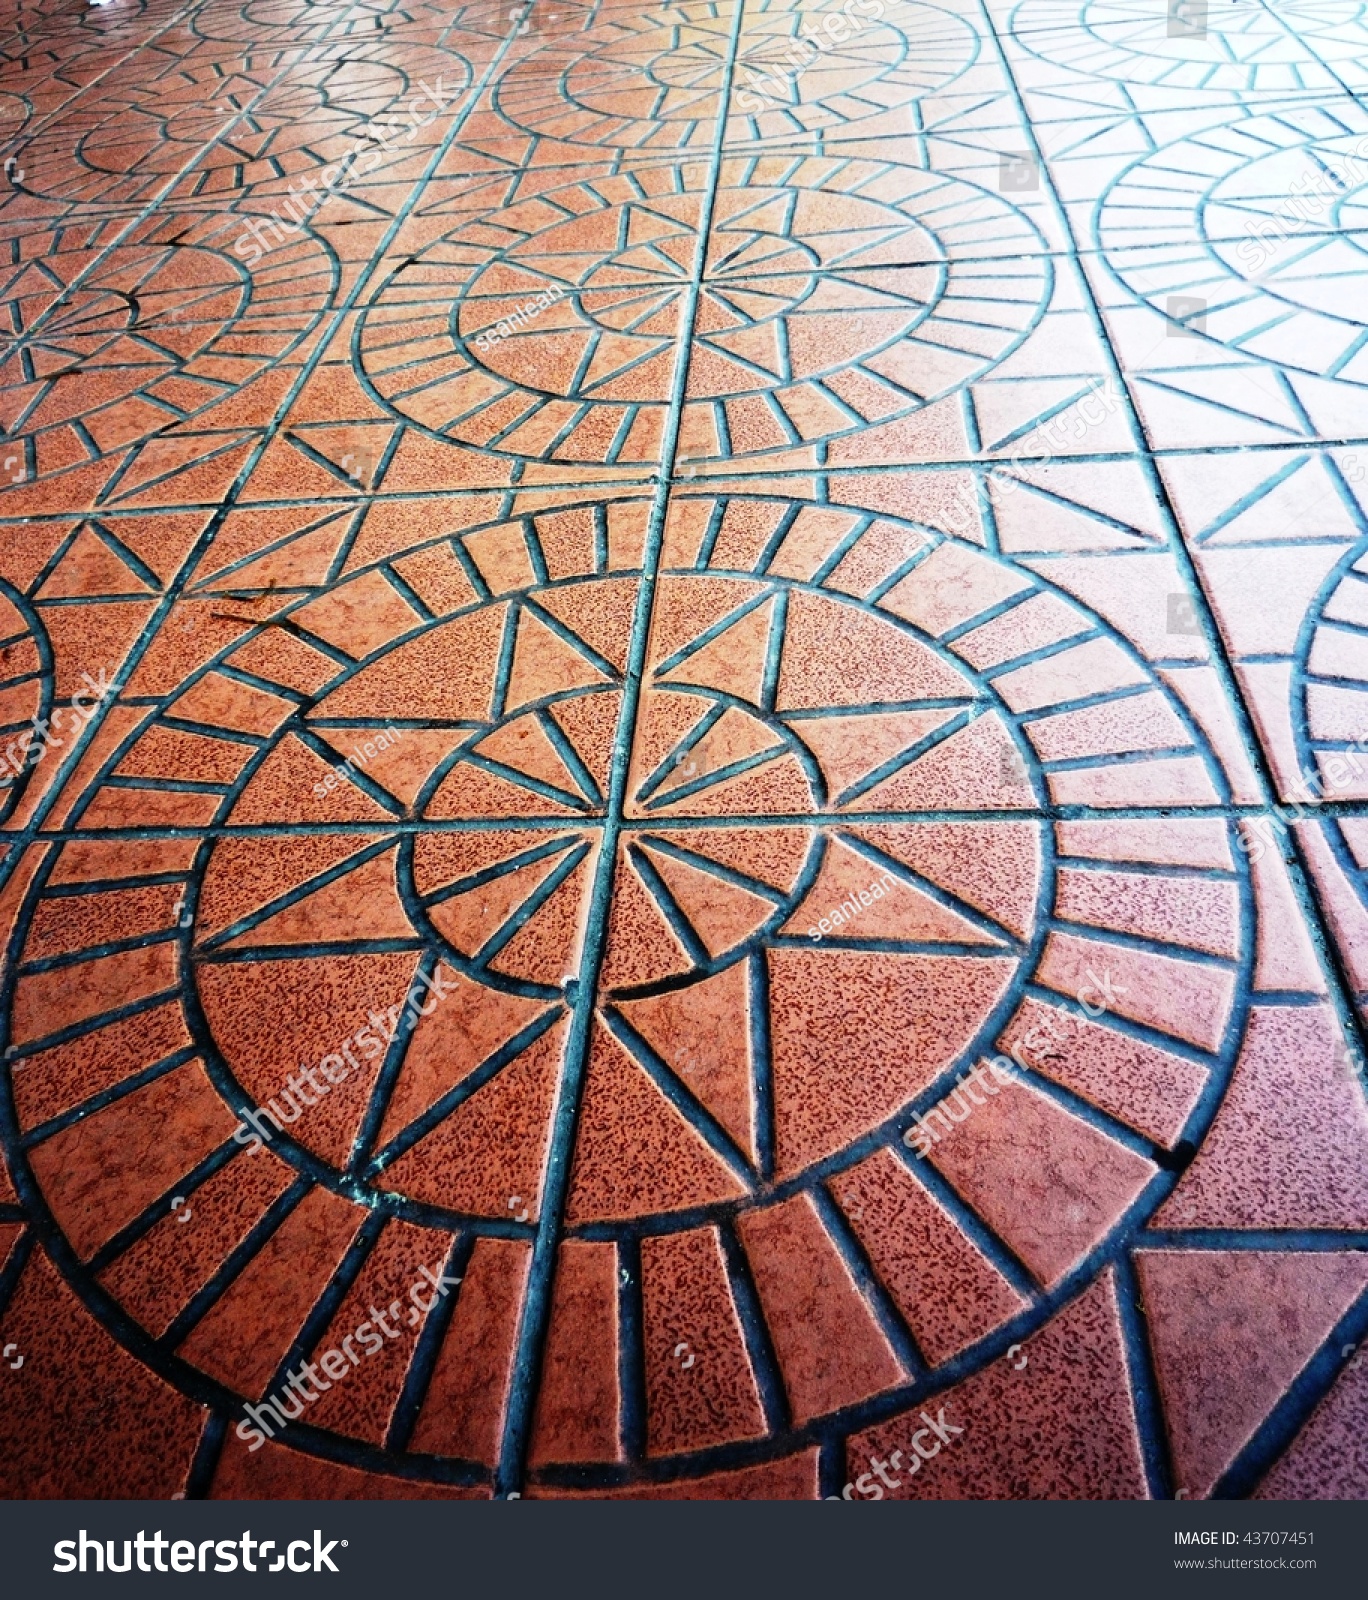 ceramic floor tile pattern in star and circle shape #43707451